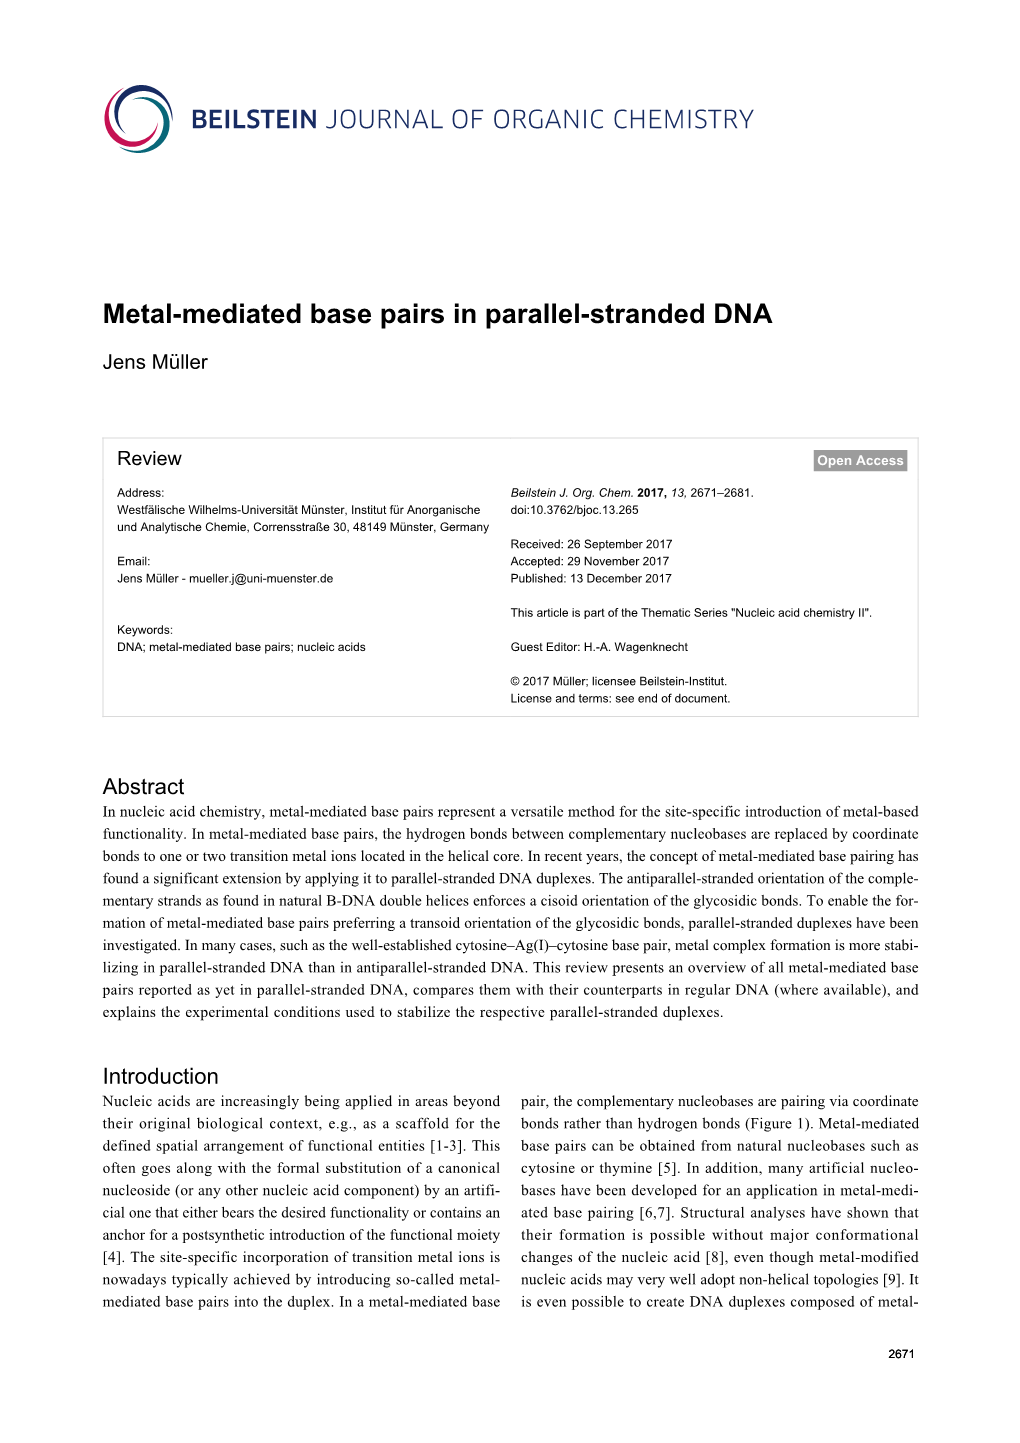 Metal-Mediated Base Pairs in Parallel-Stranded DNA